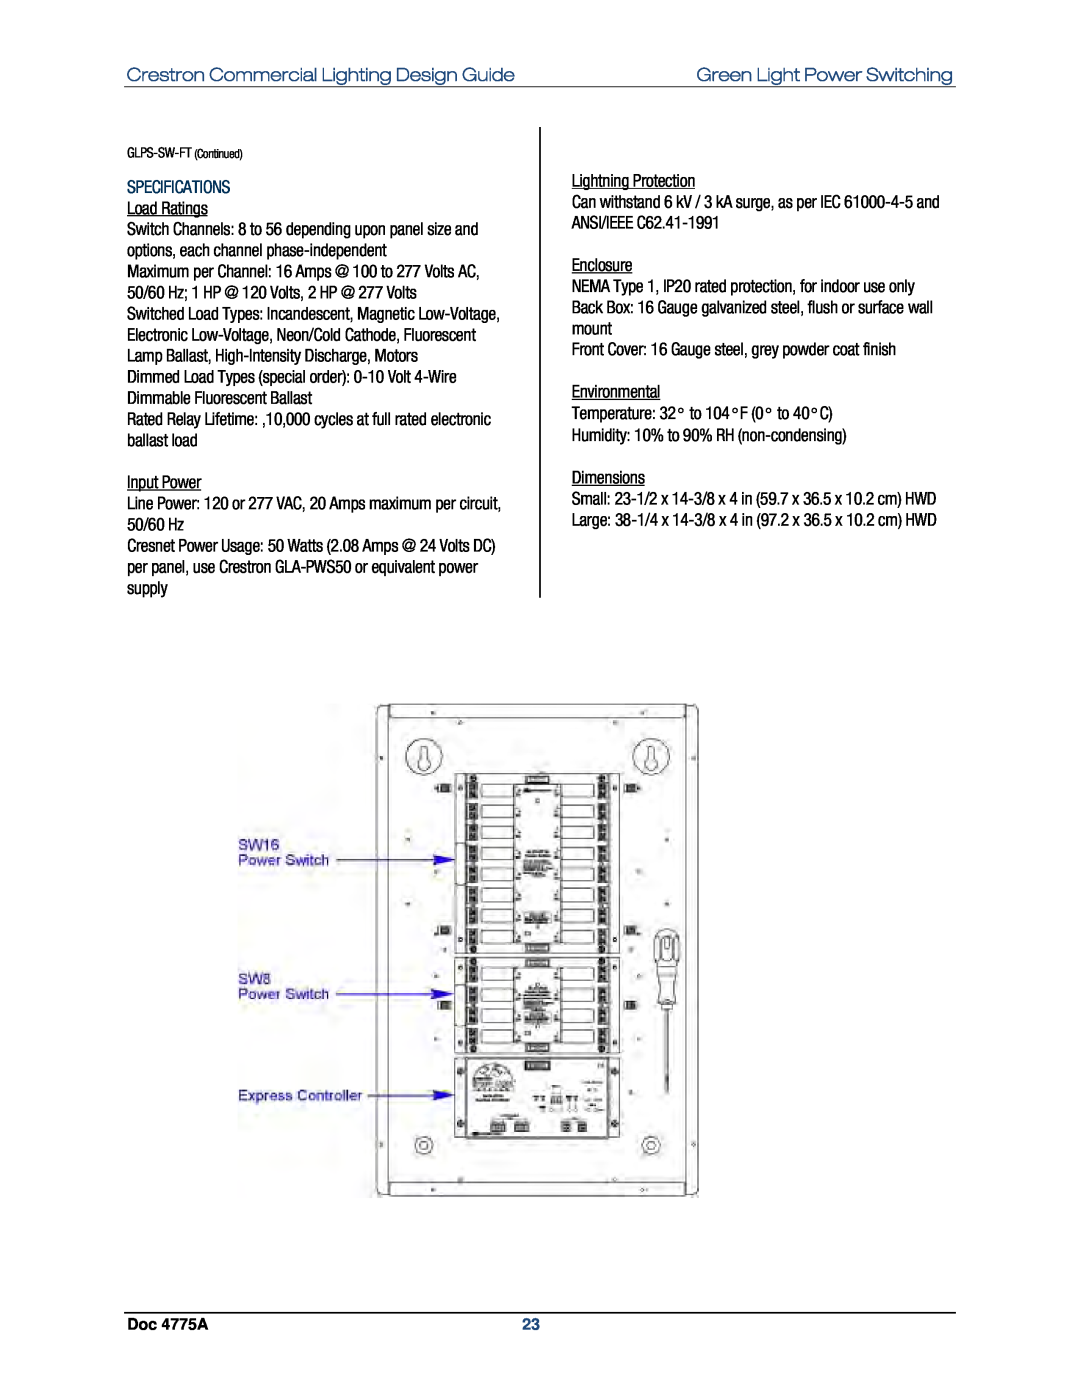 Crestron electronic GLPS-HSW, IPAC-GL1 Crestron Commercial Lighting Design Guide, Green Light Power Switching, Input Power 